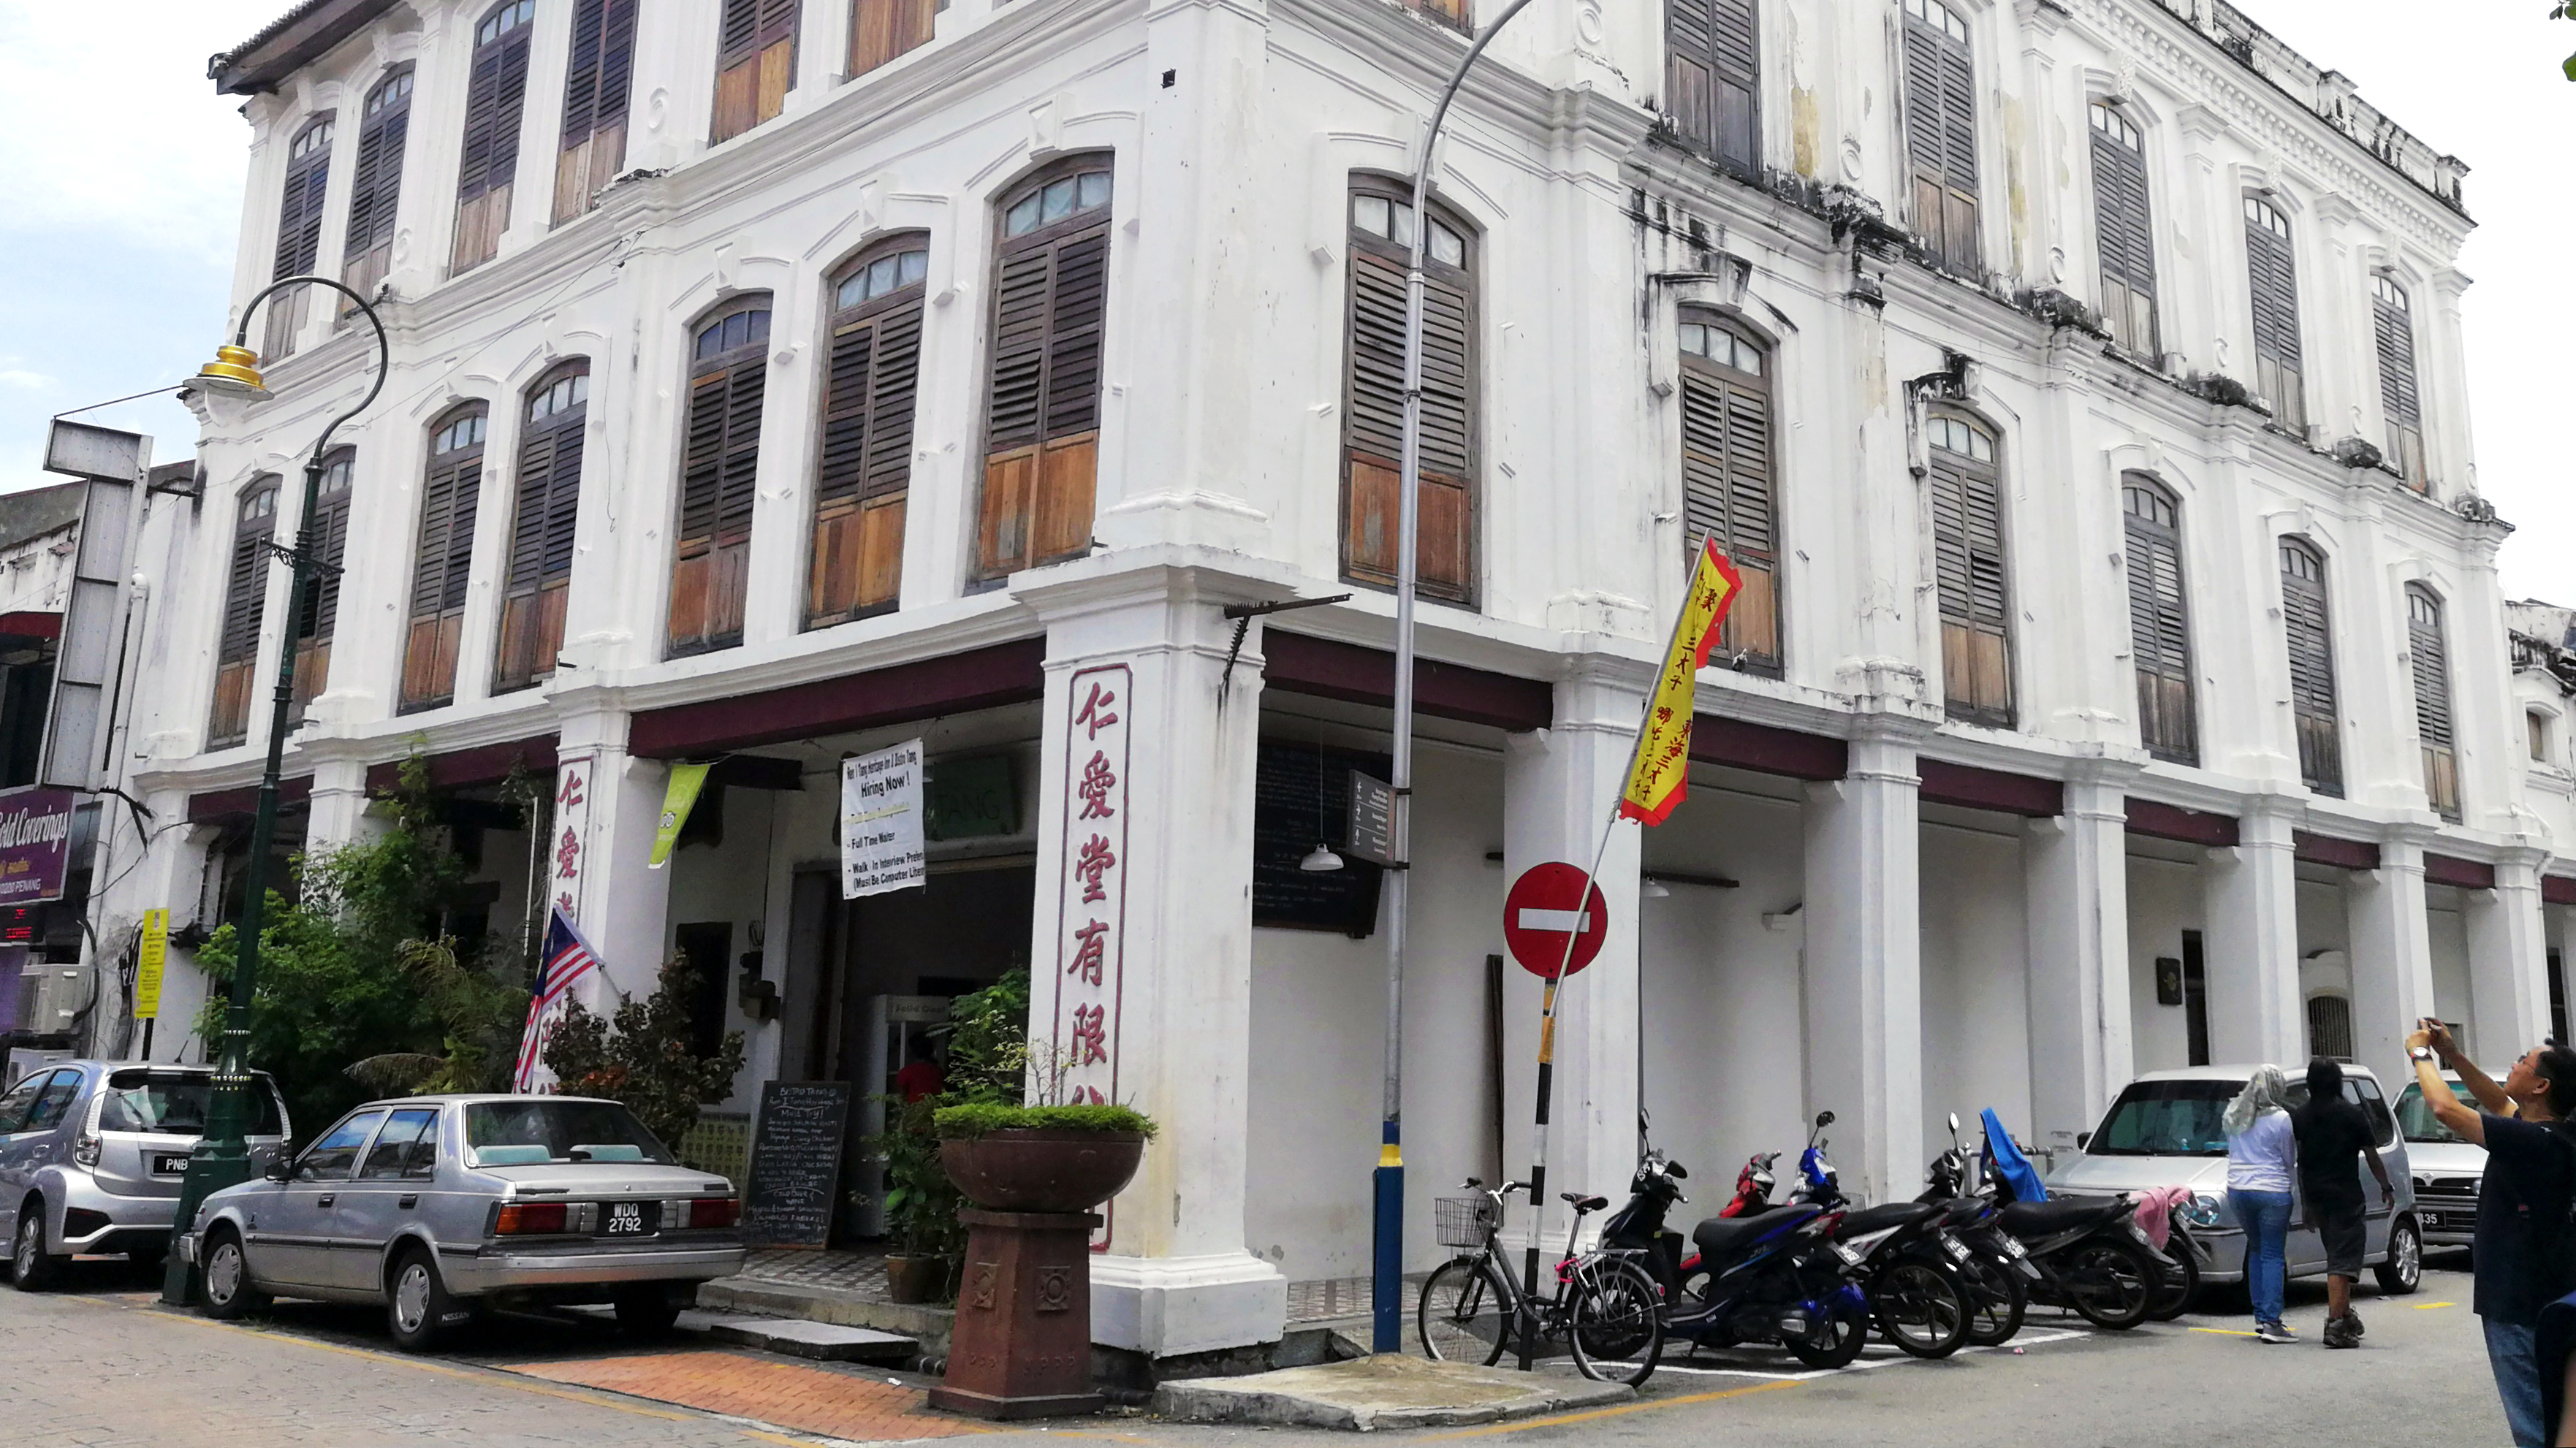 Ren I Tang is a boutique hotel restored from a former derelict 19th century Chinese medical hall building. It was opened by a pair of sustainability-minded friends, Eu Yeok Siew and Low Teng Lei. Photo by Alexandra Wong